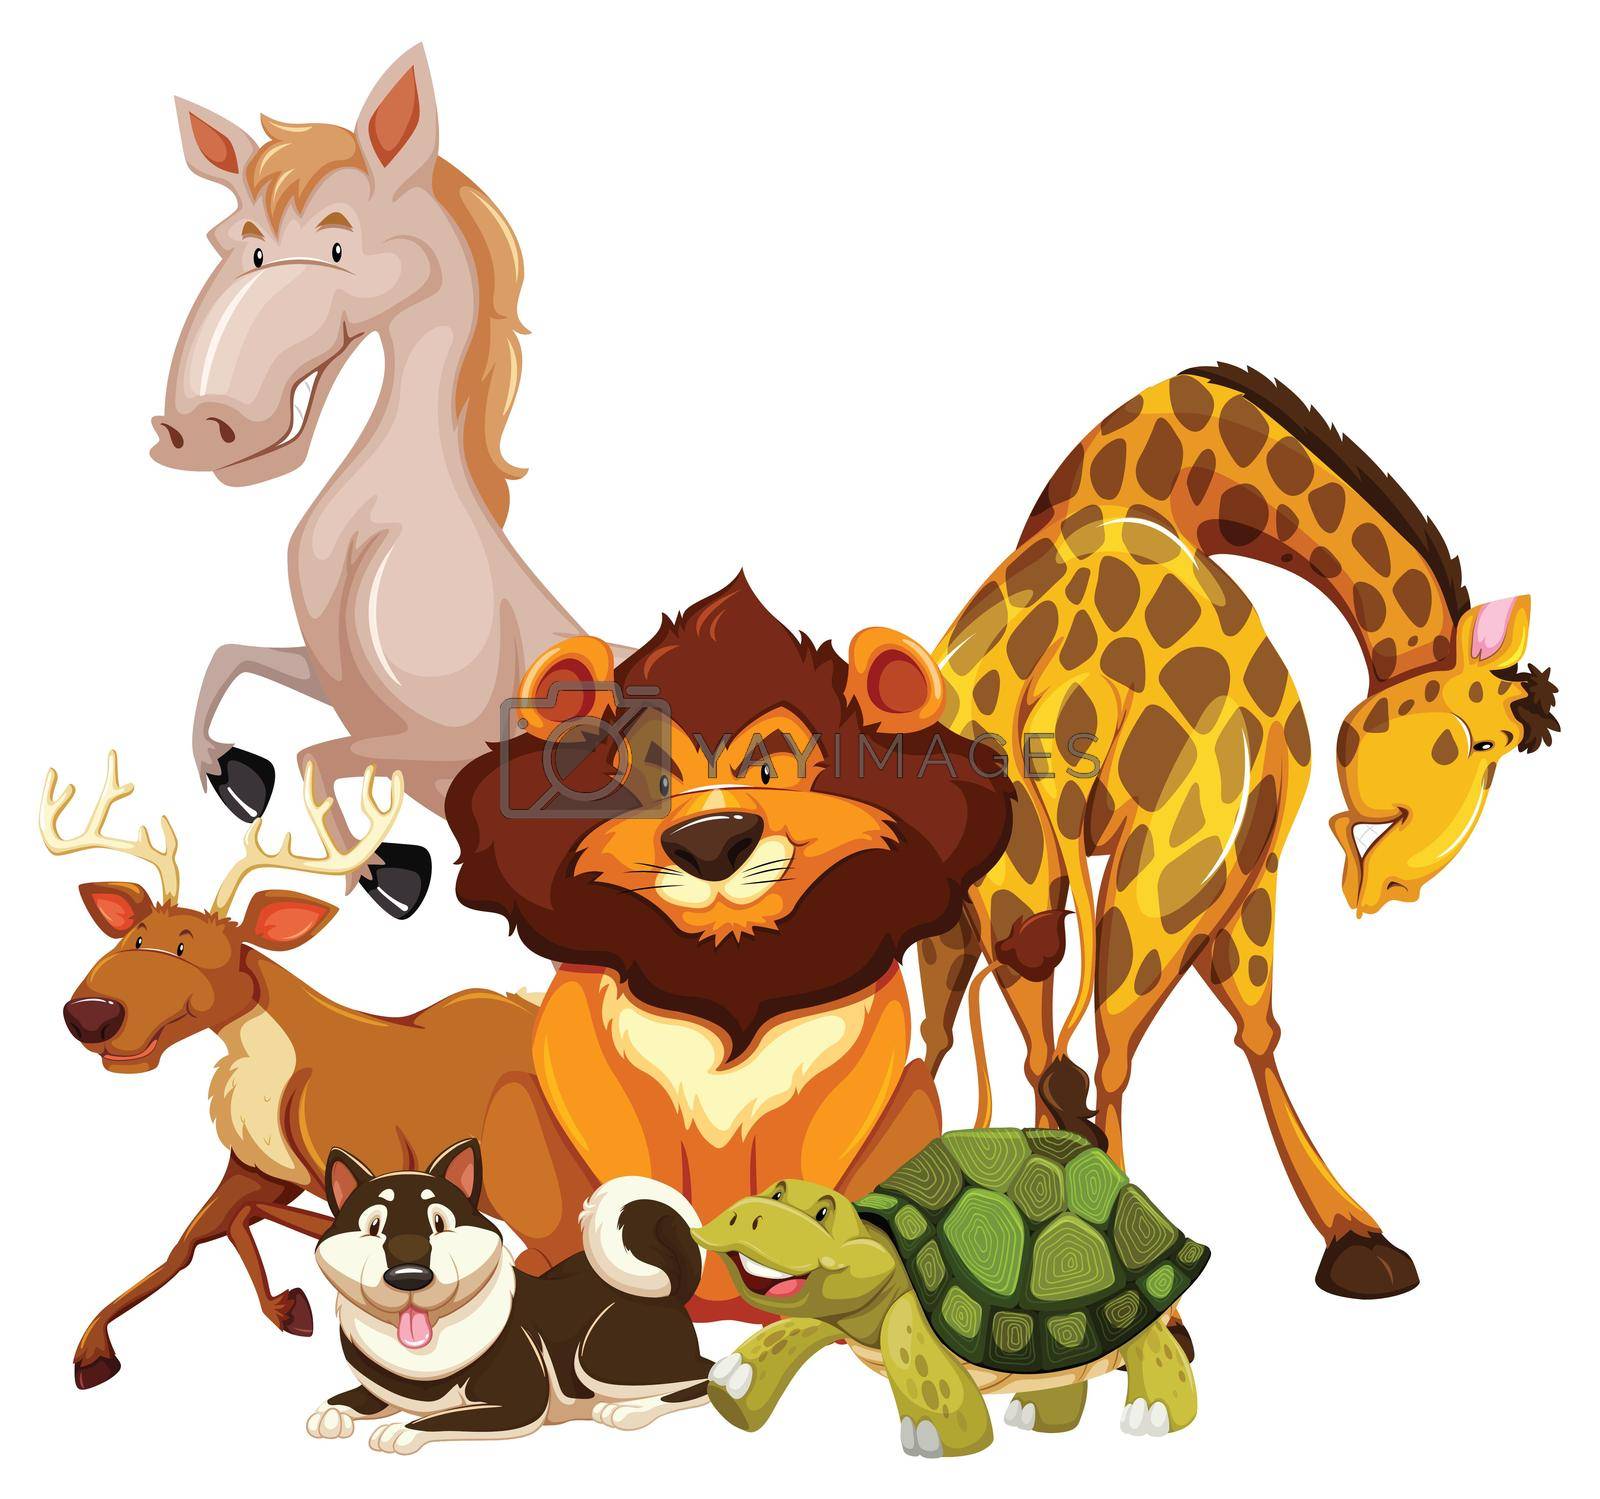 Group of animals on a white background